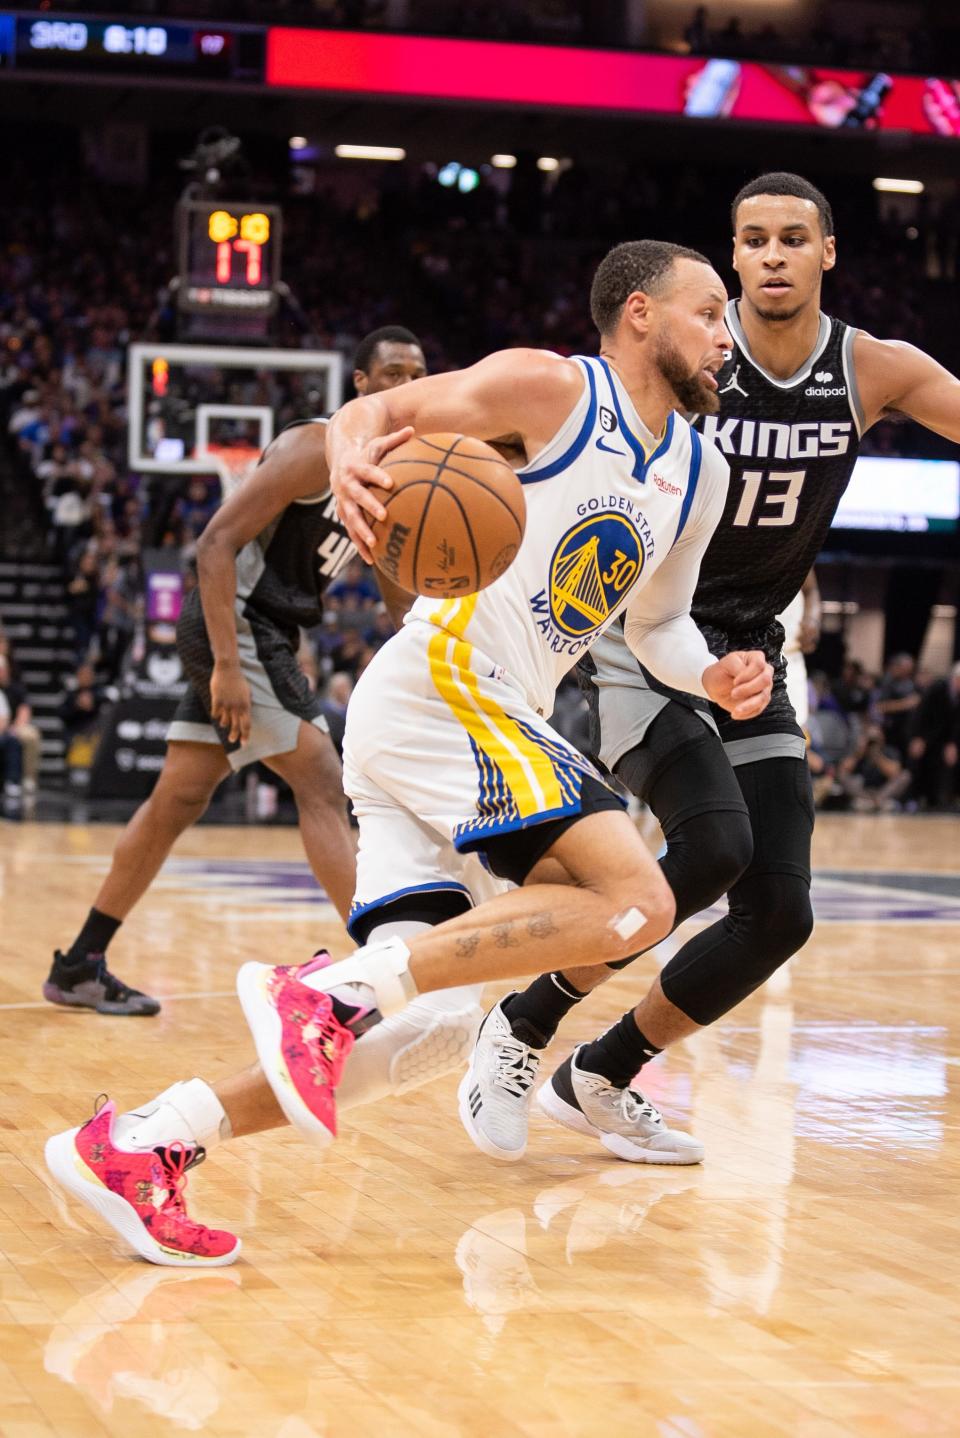 Will Steph Curry and the Golden State Warriors beat the Sacramento Kings in Game 1 of their NBA Playoffs series?